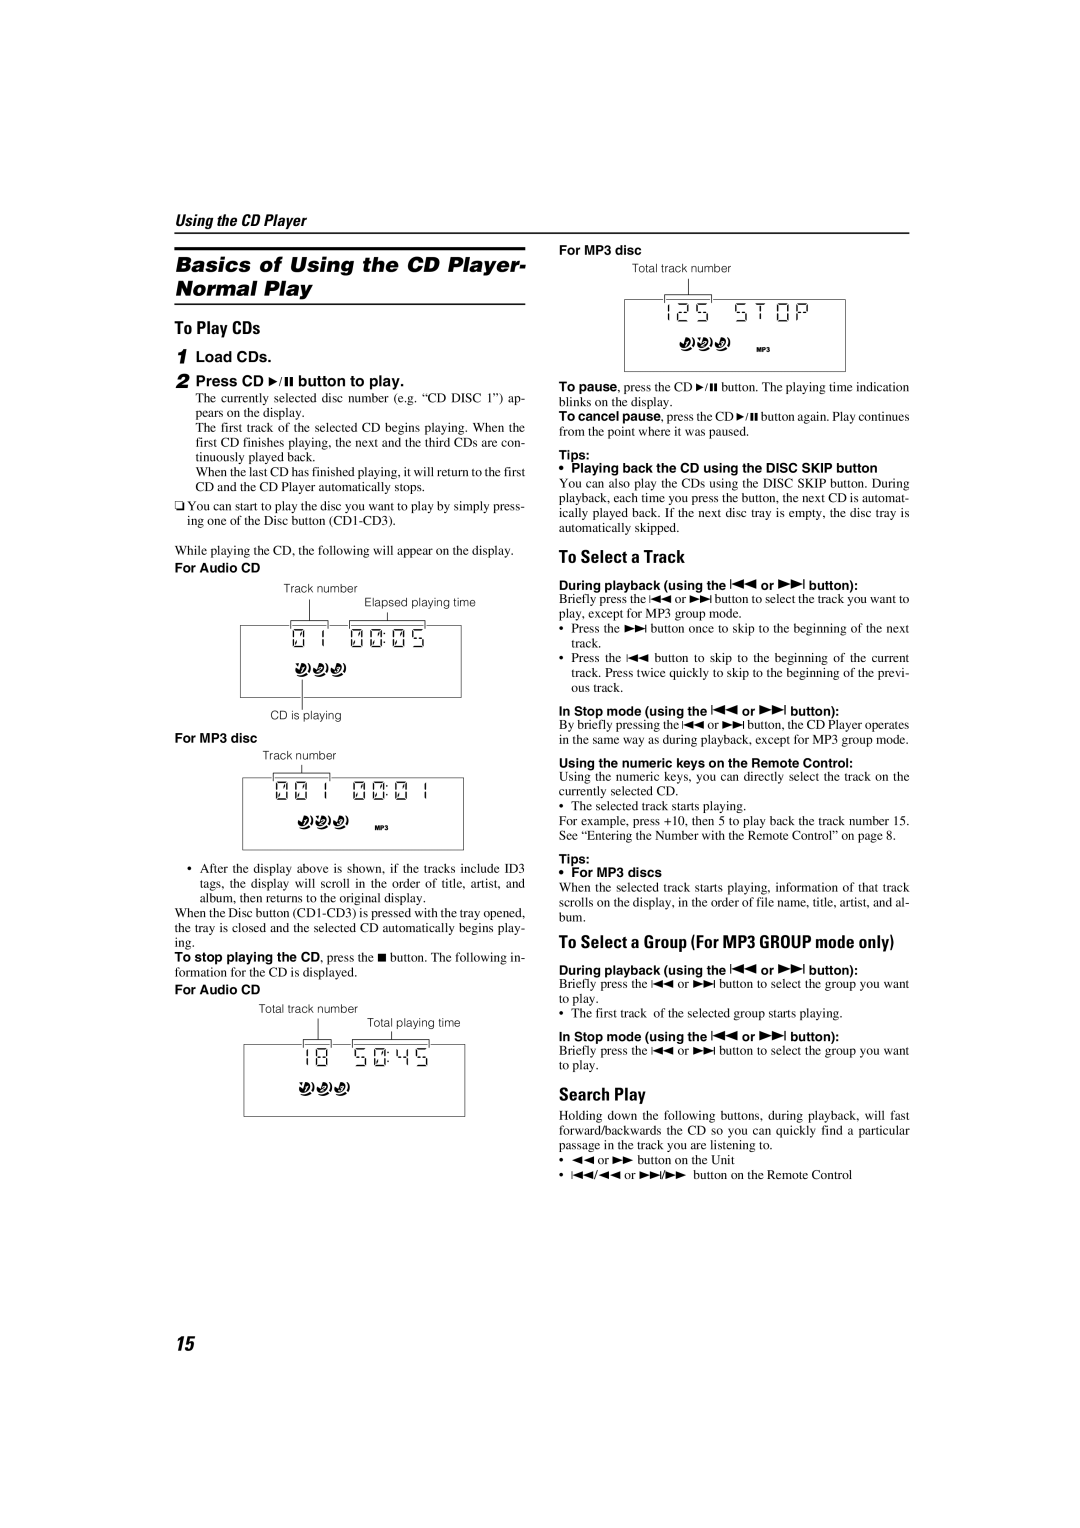 JVC LVT1346-002A manual Basics of Using the CD Player- Normal Play, To Play CDs, To Select a Track, Search Play 